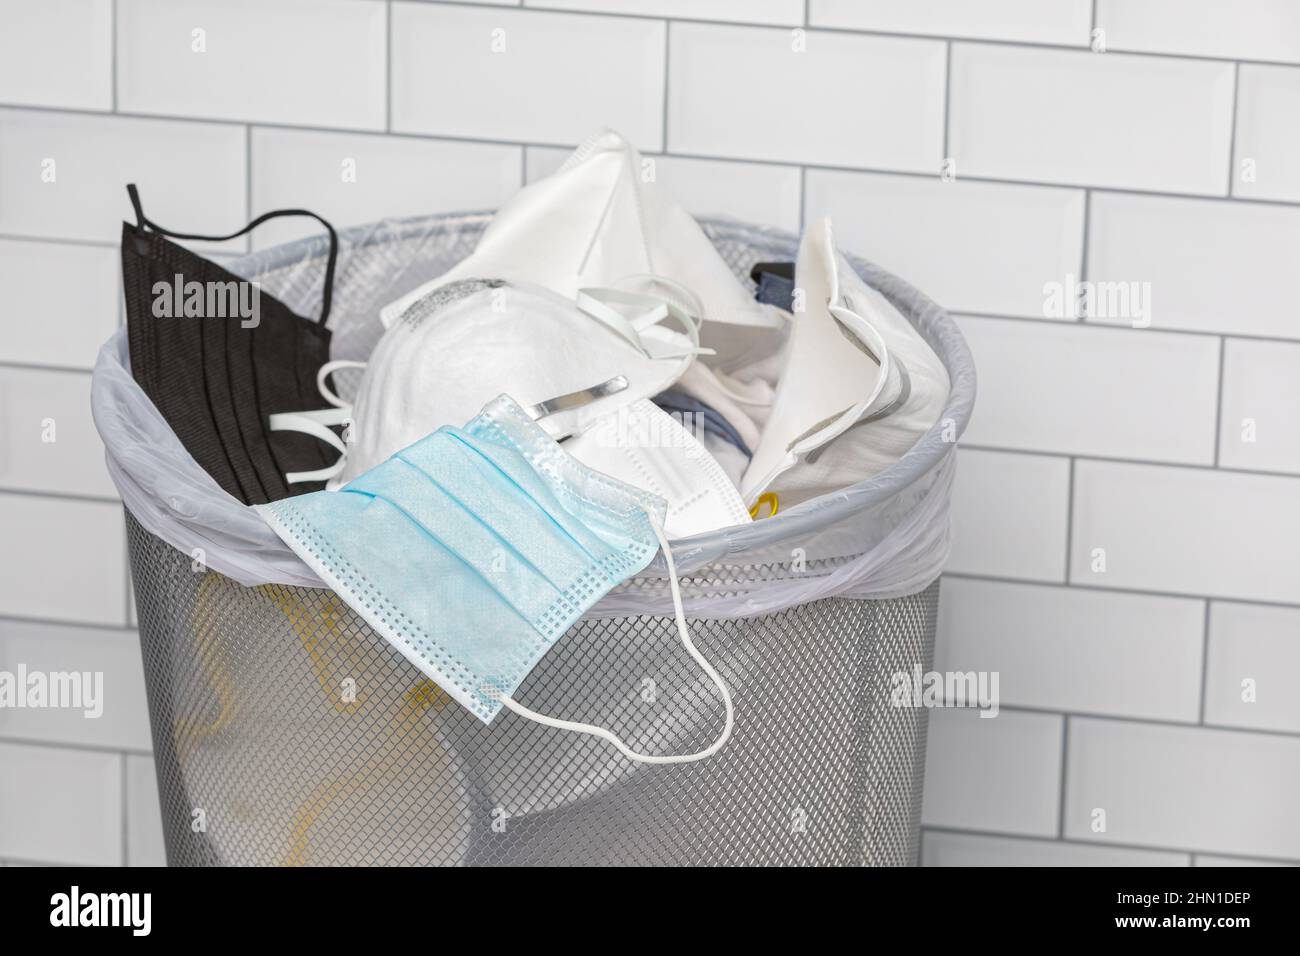 Face masks in garbage can. Covid-19 face covering mandate, disposal and requirement. Stock Photo